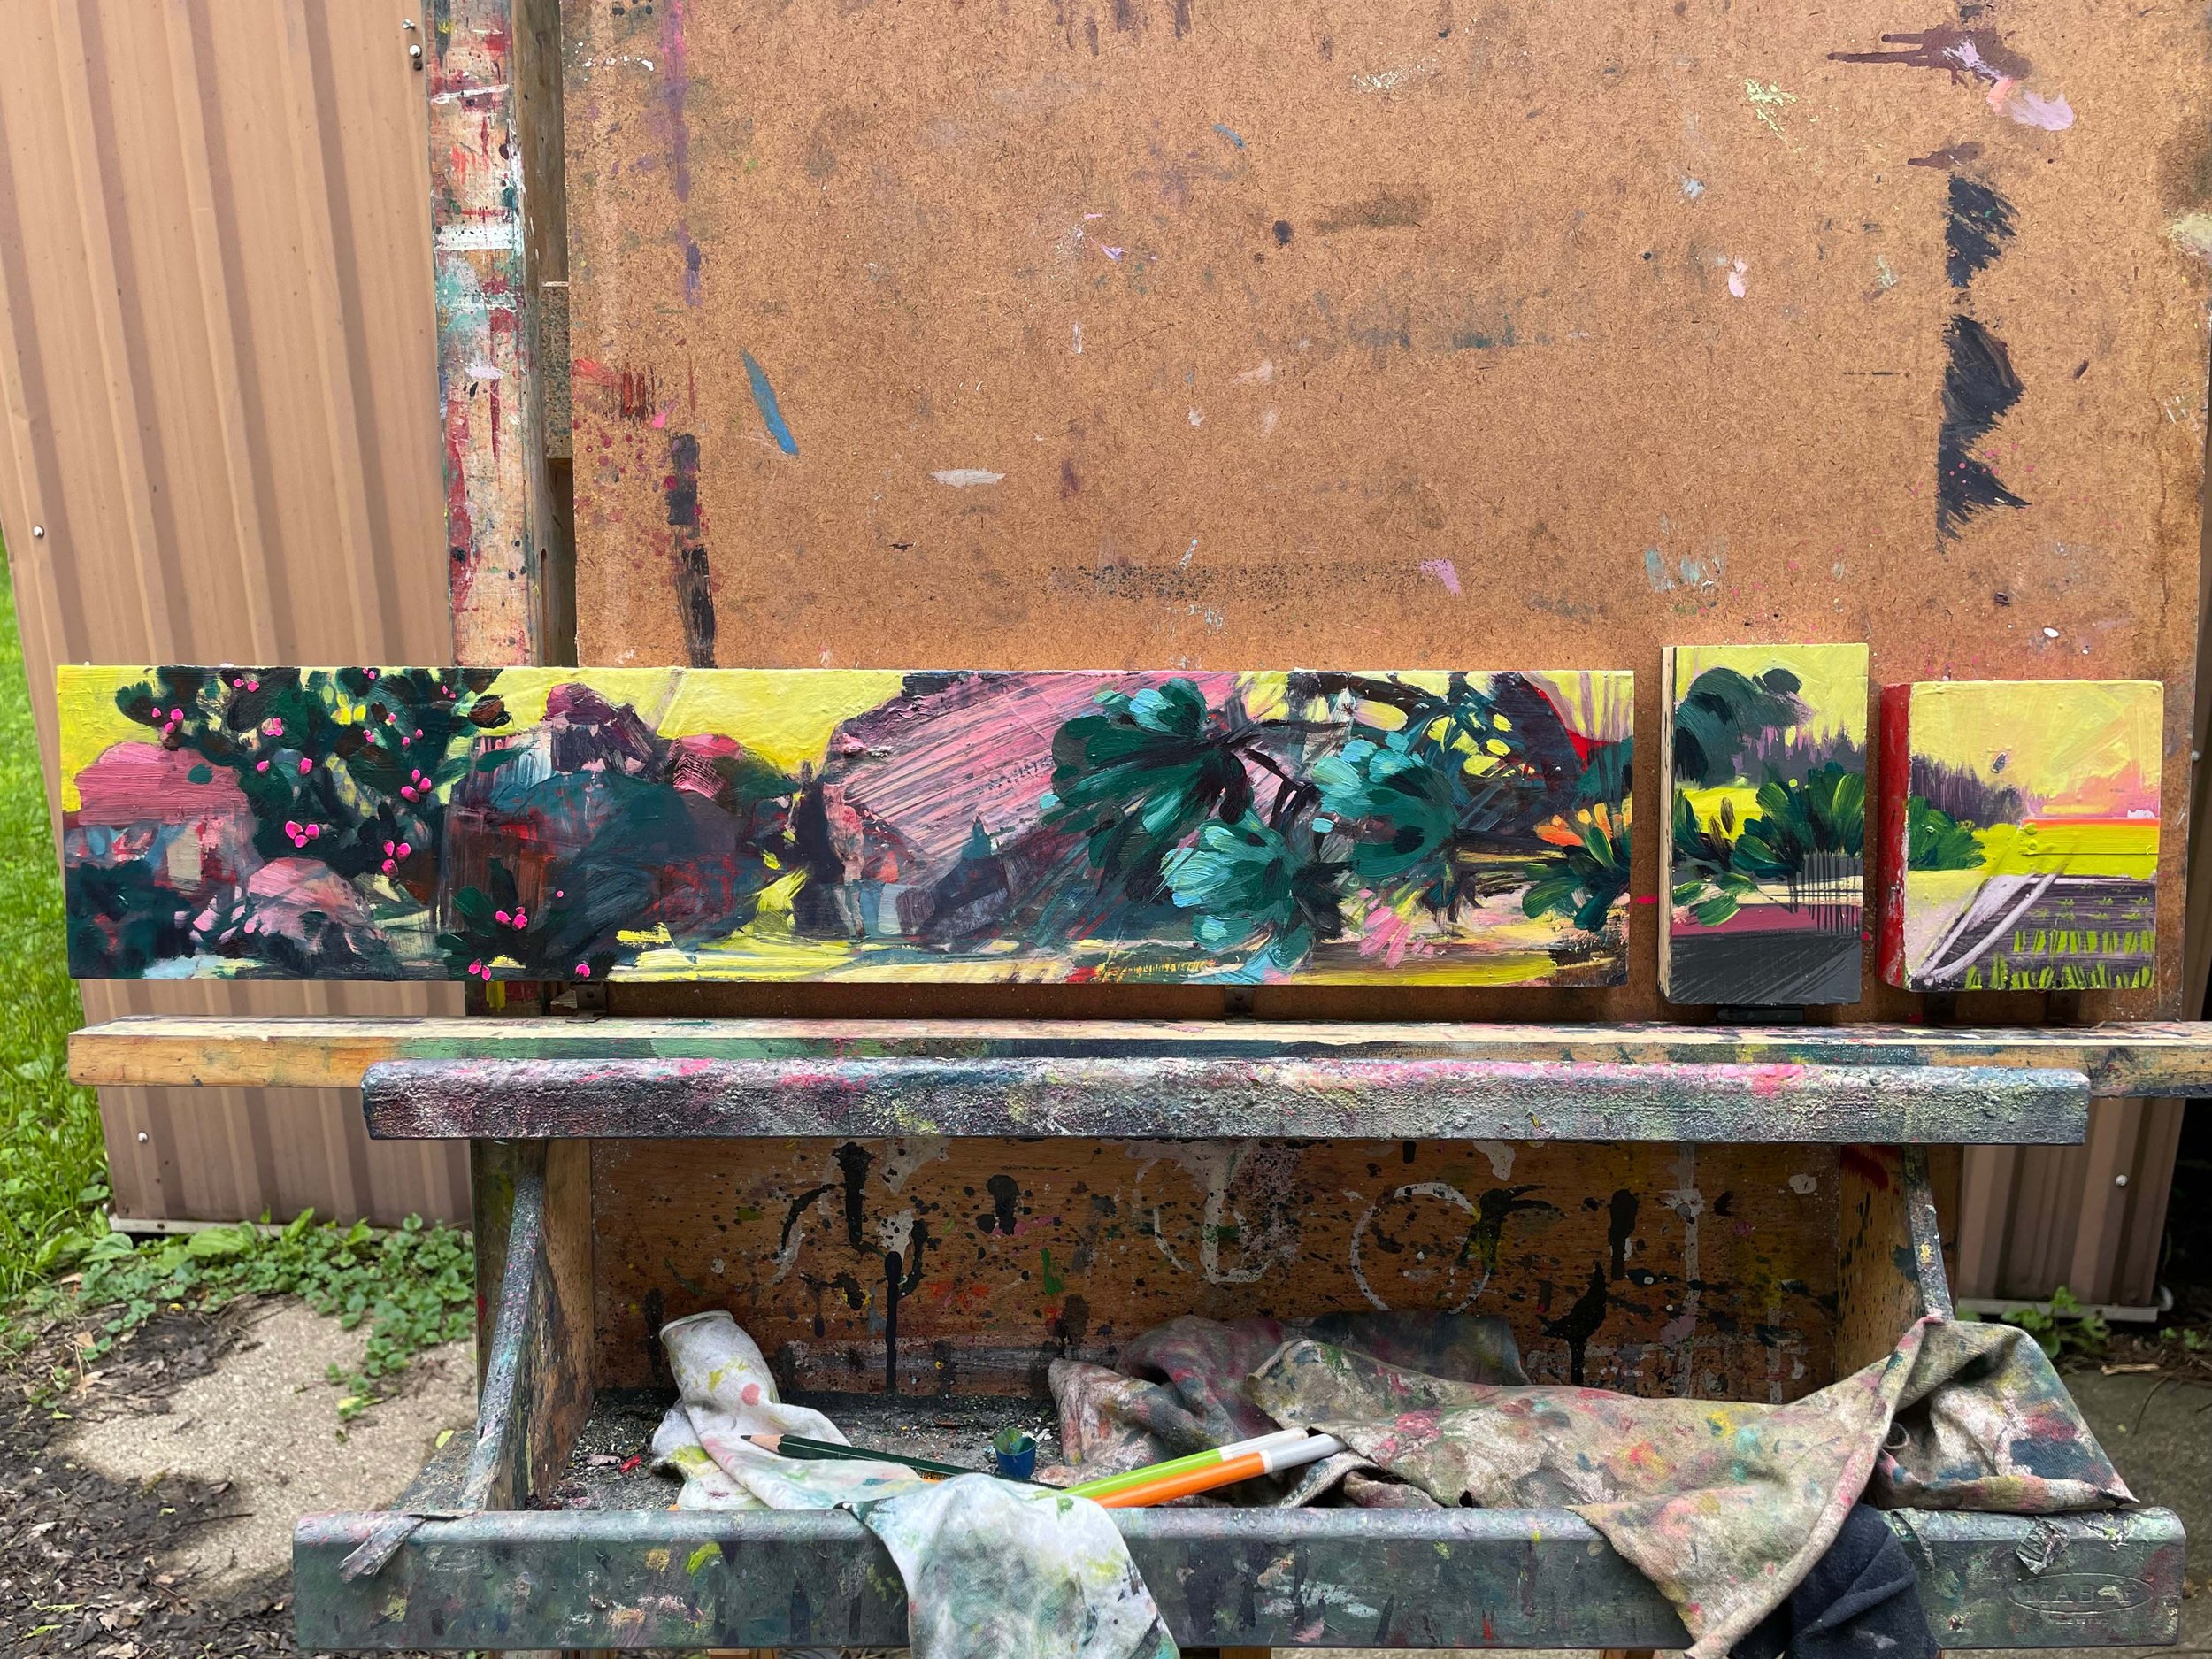 Reconfigured: Nineteen (Prickly Pears), on the easel